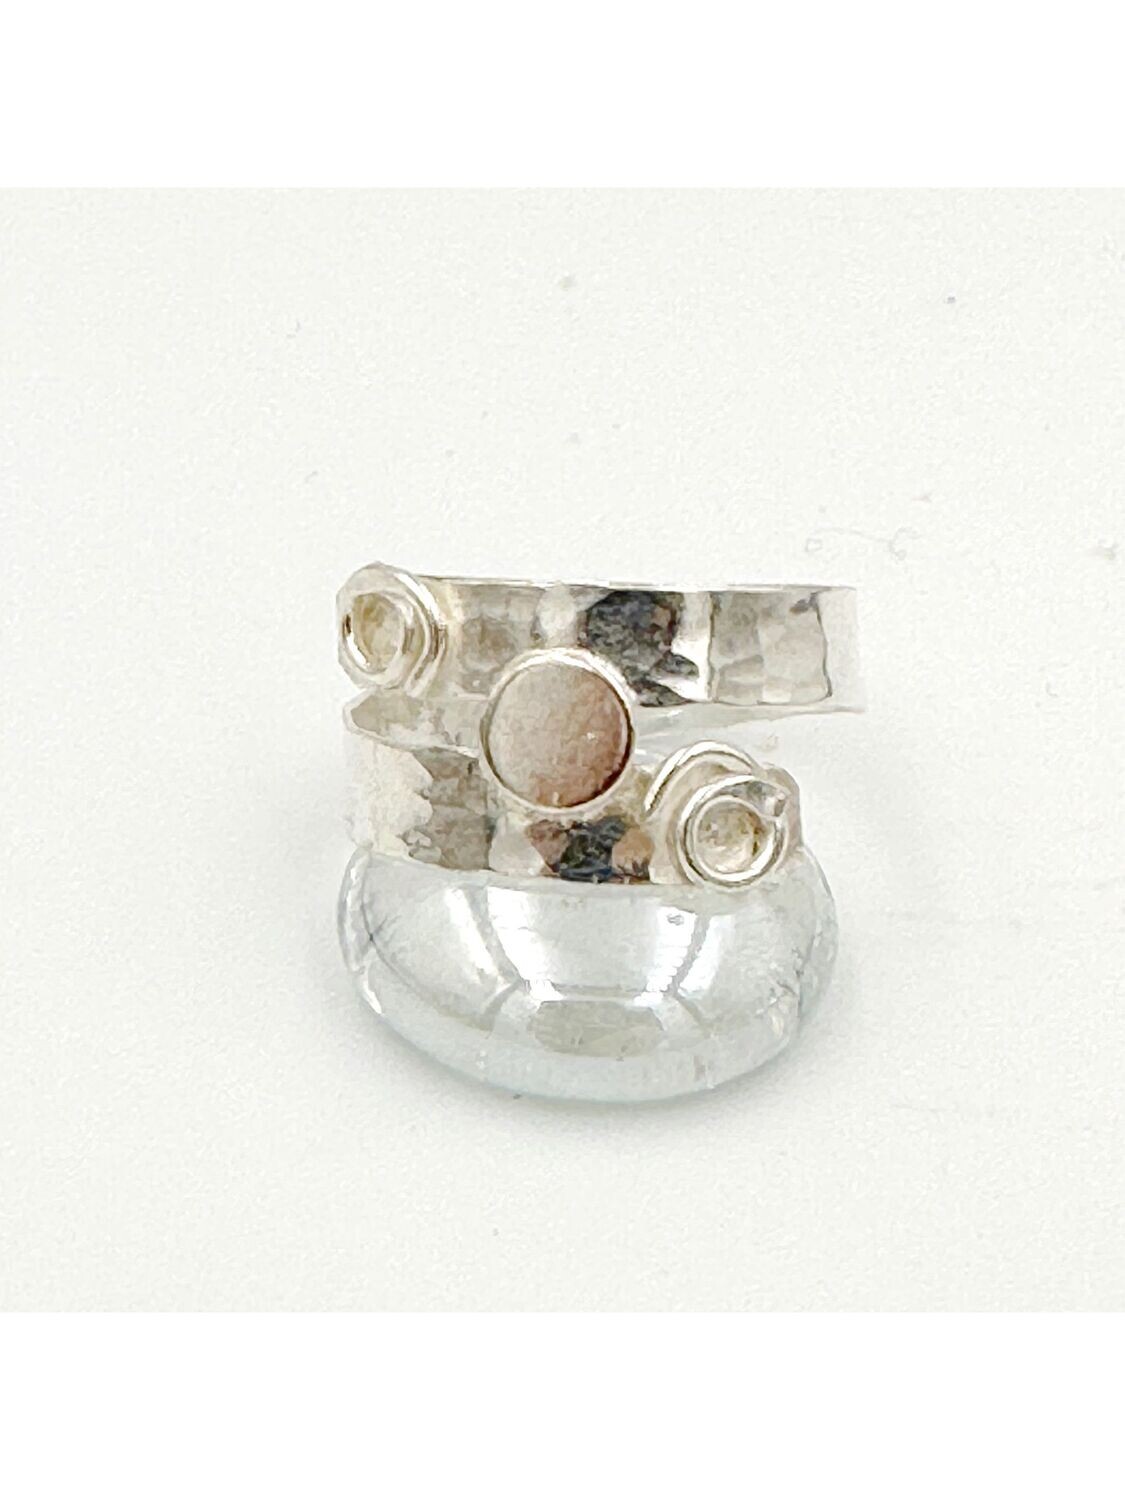 Crossover ring with circle and spiral detail